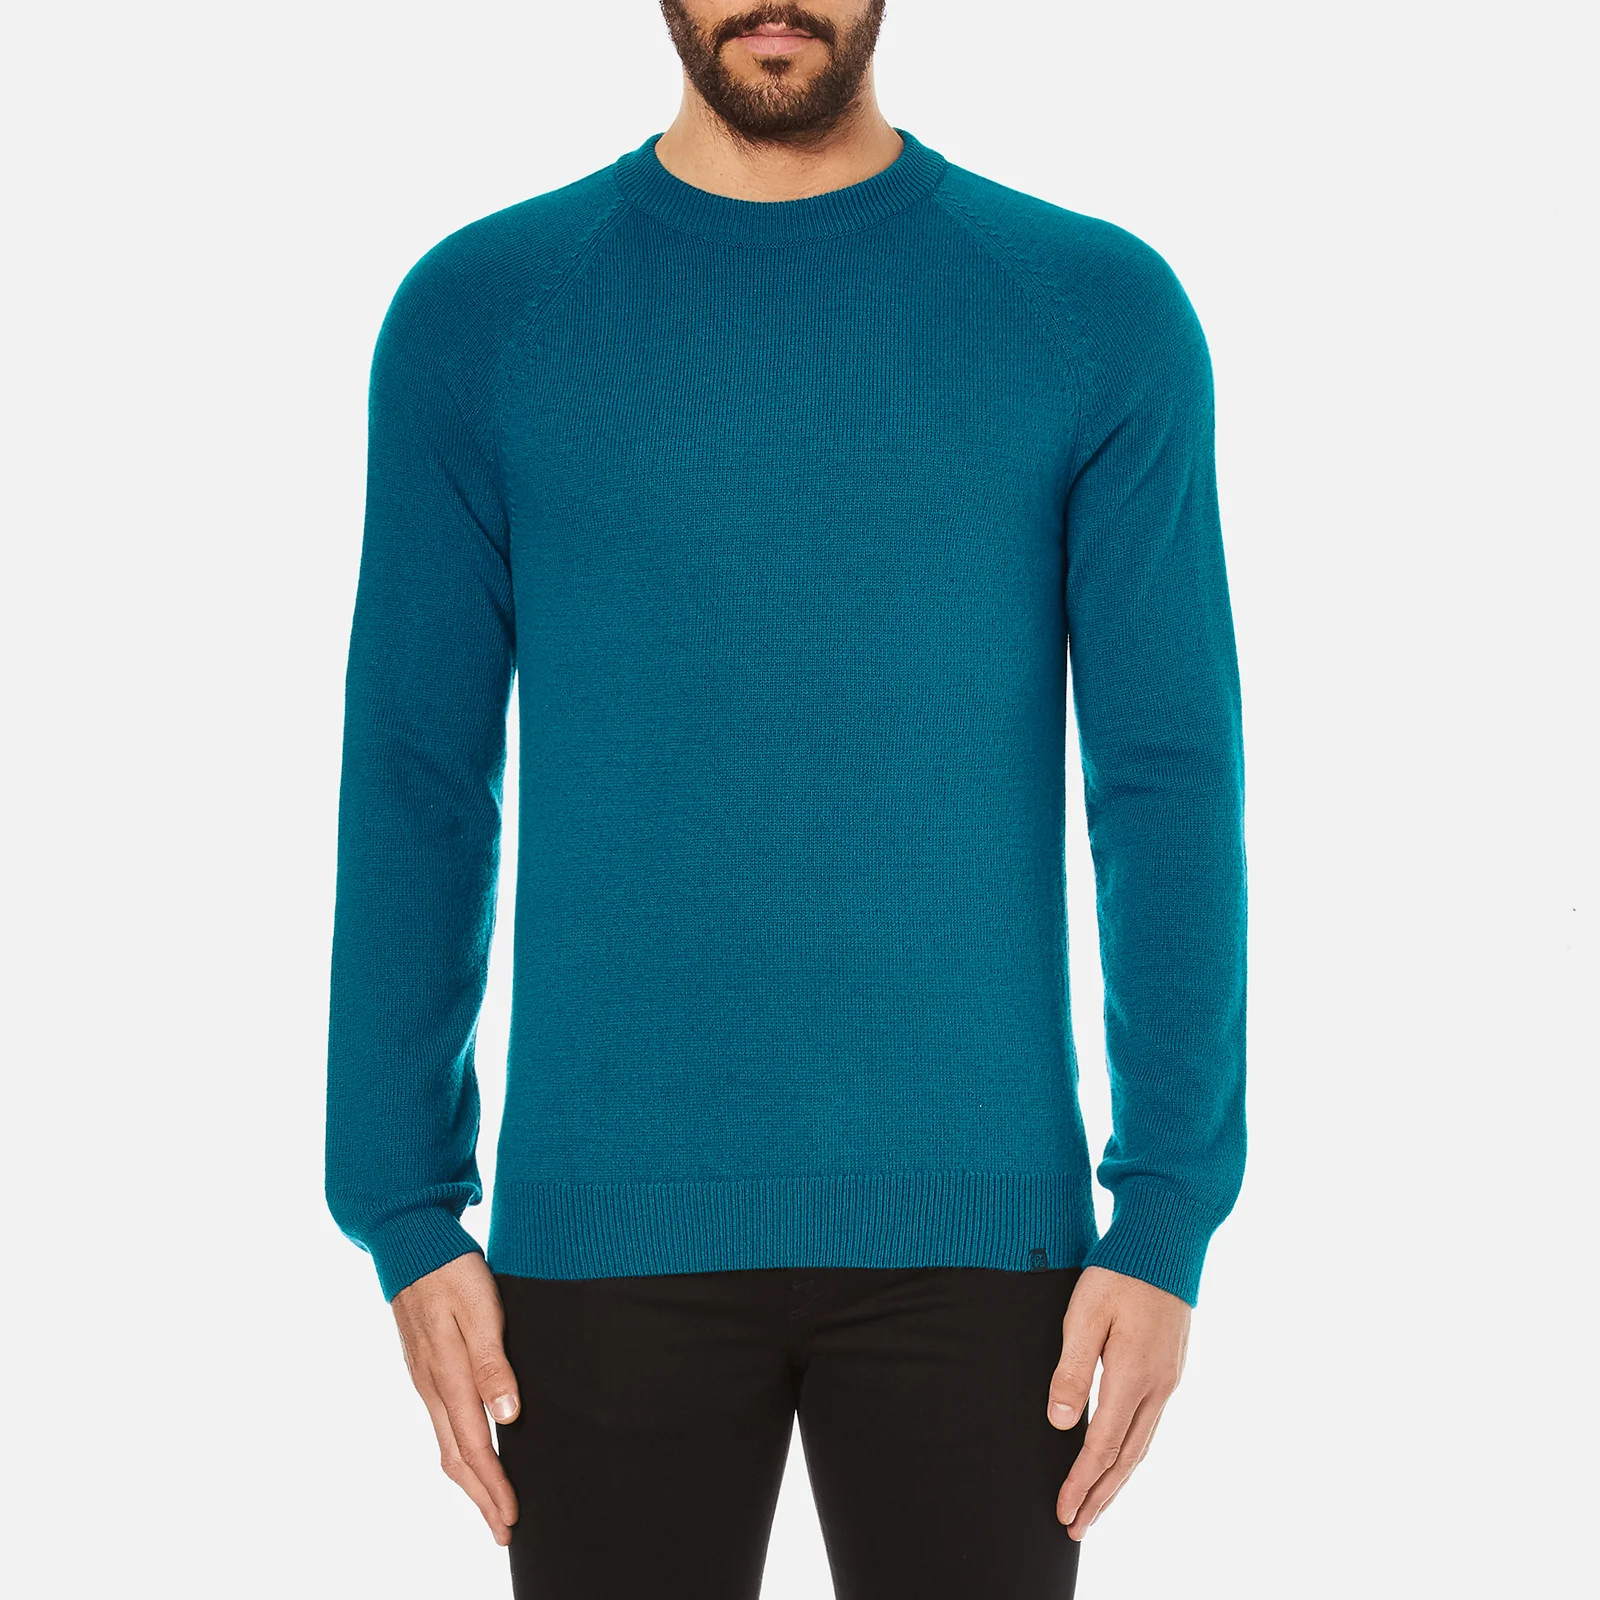 PS by Paul Smith Men's Crew Neck Jumper - Blue Image 1